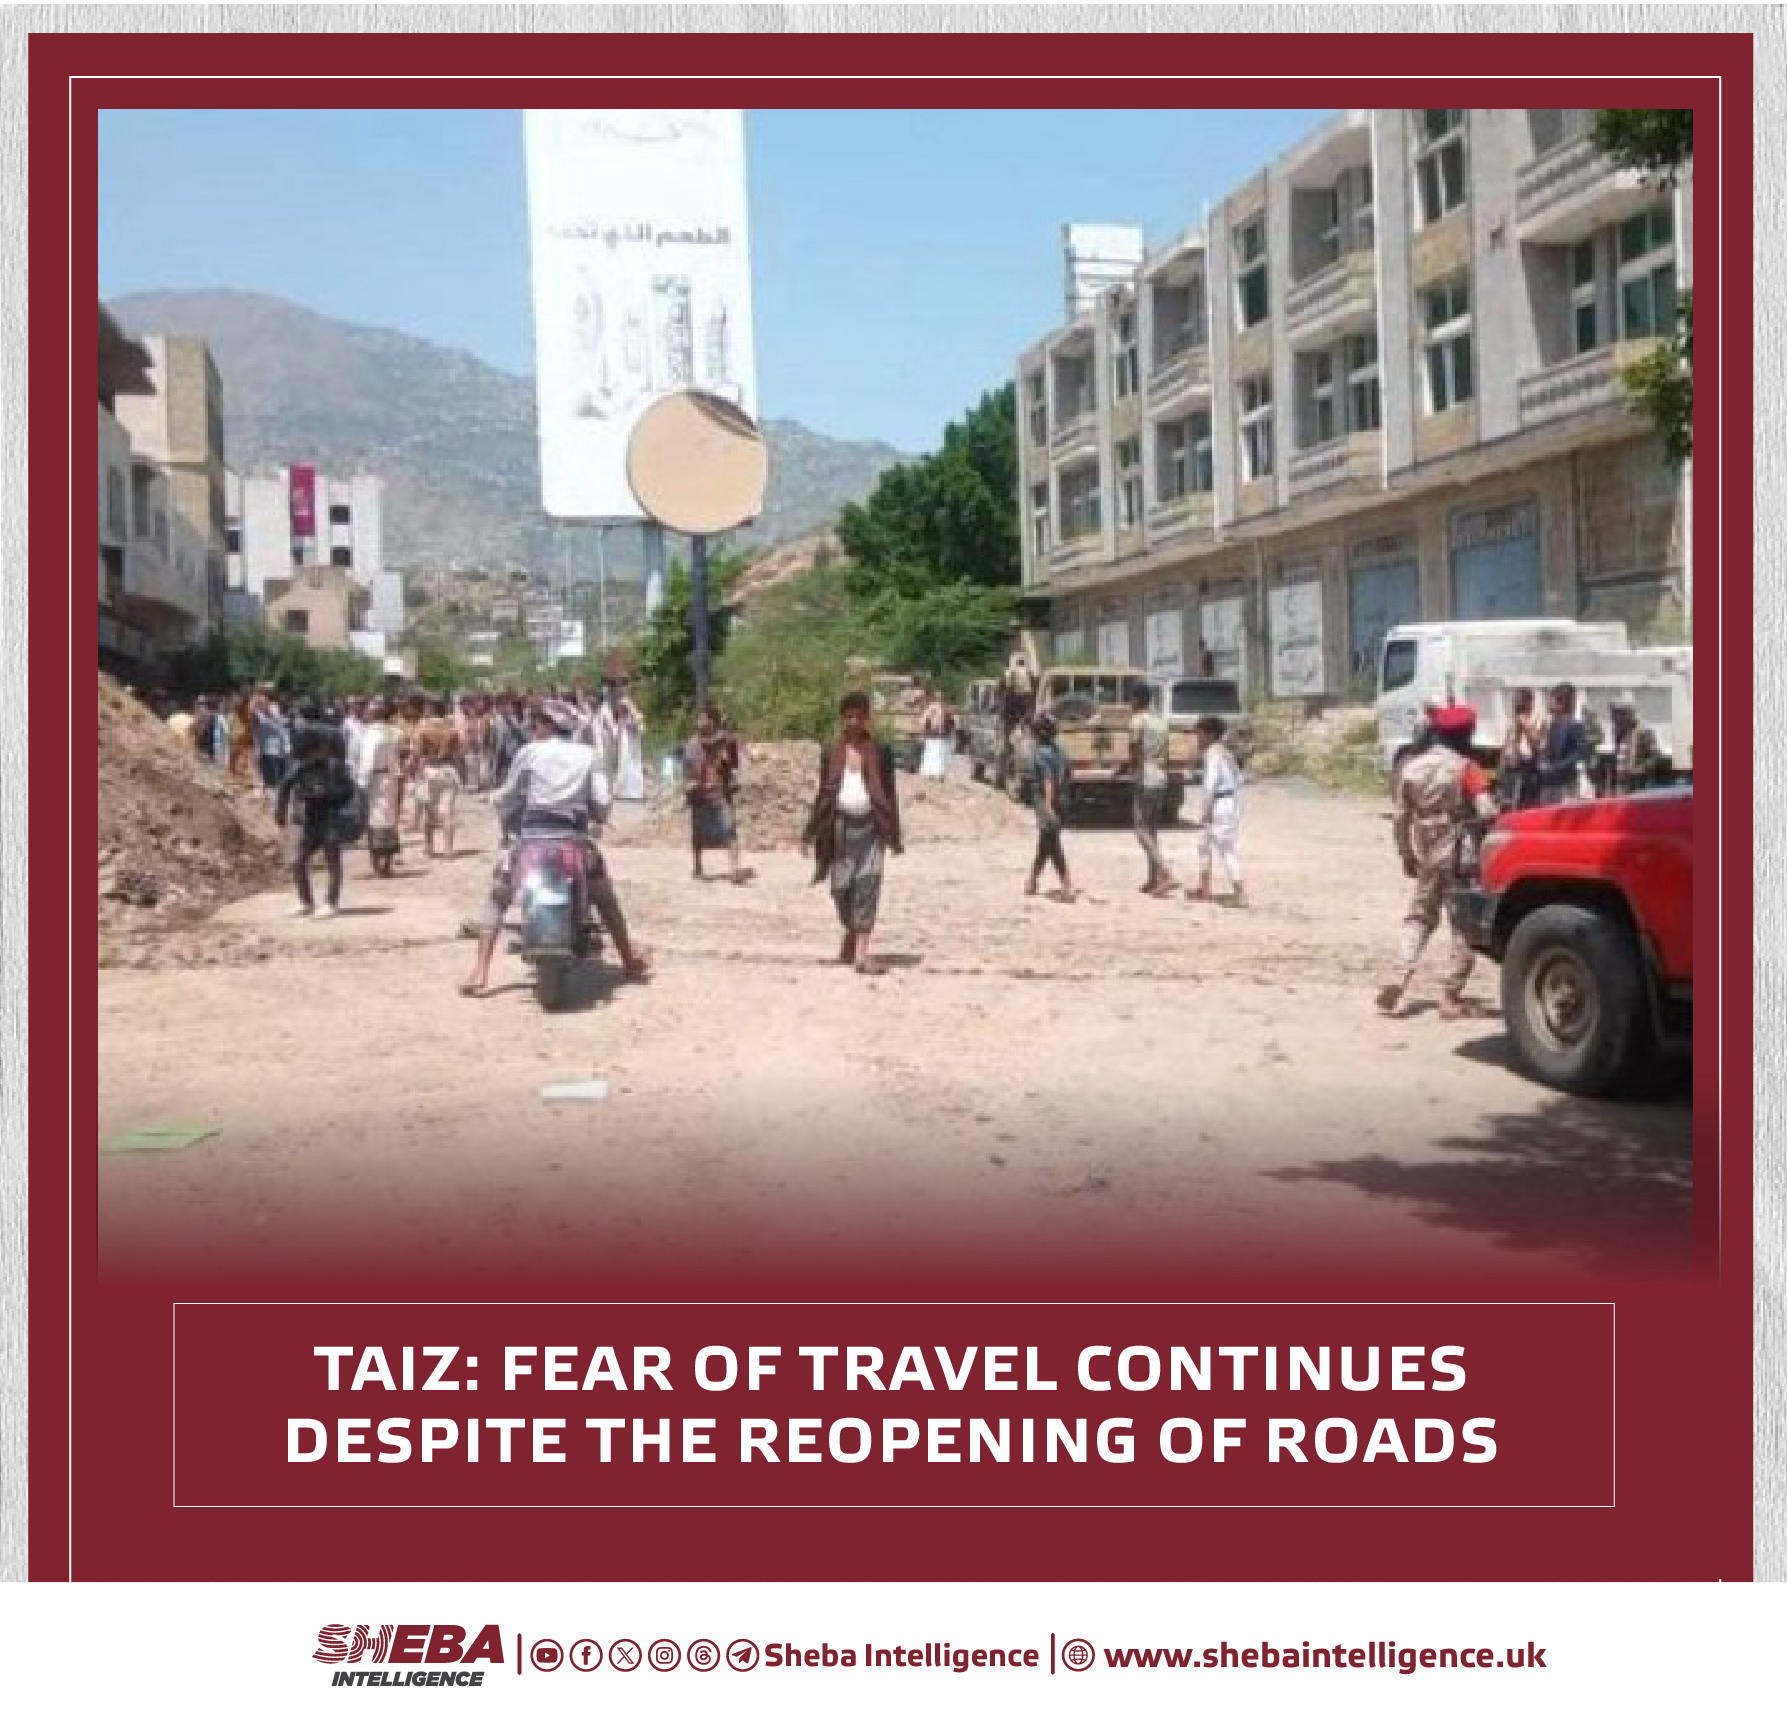 Taiz: Fear of Travel Continues Despite the Reopening of Roads